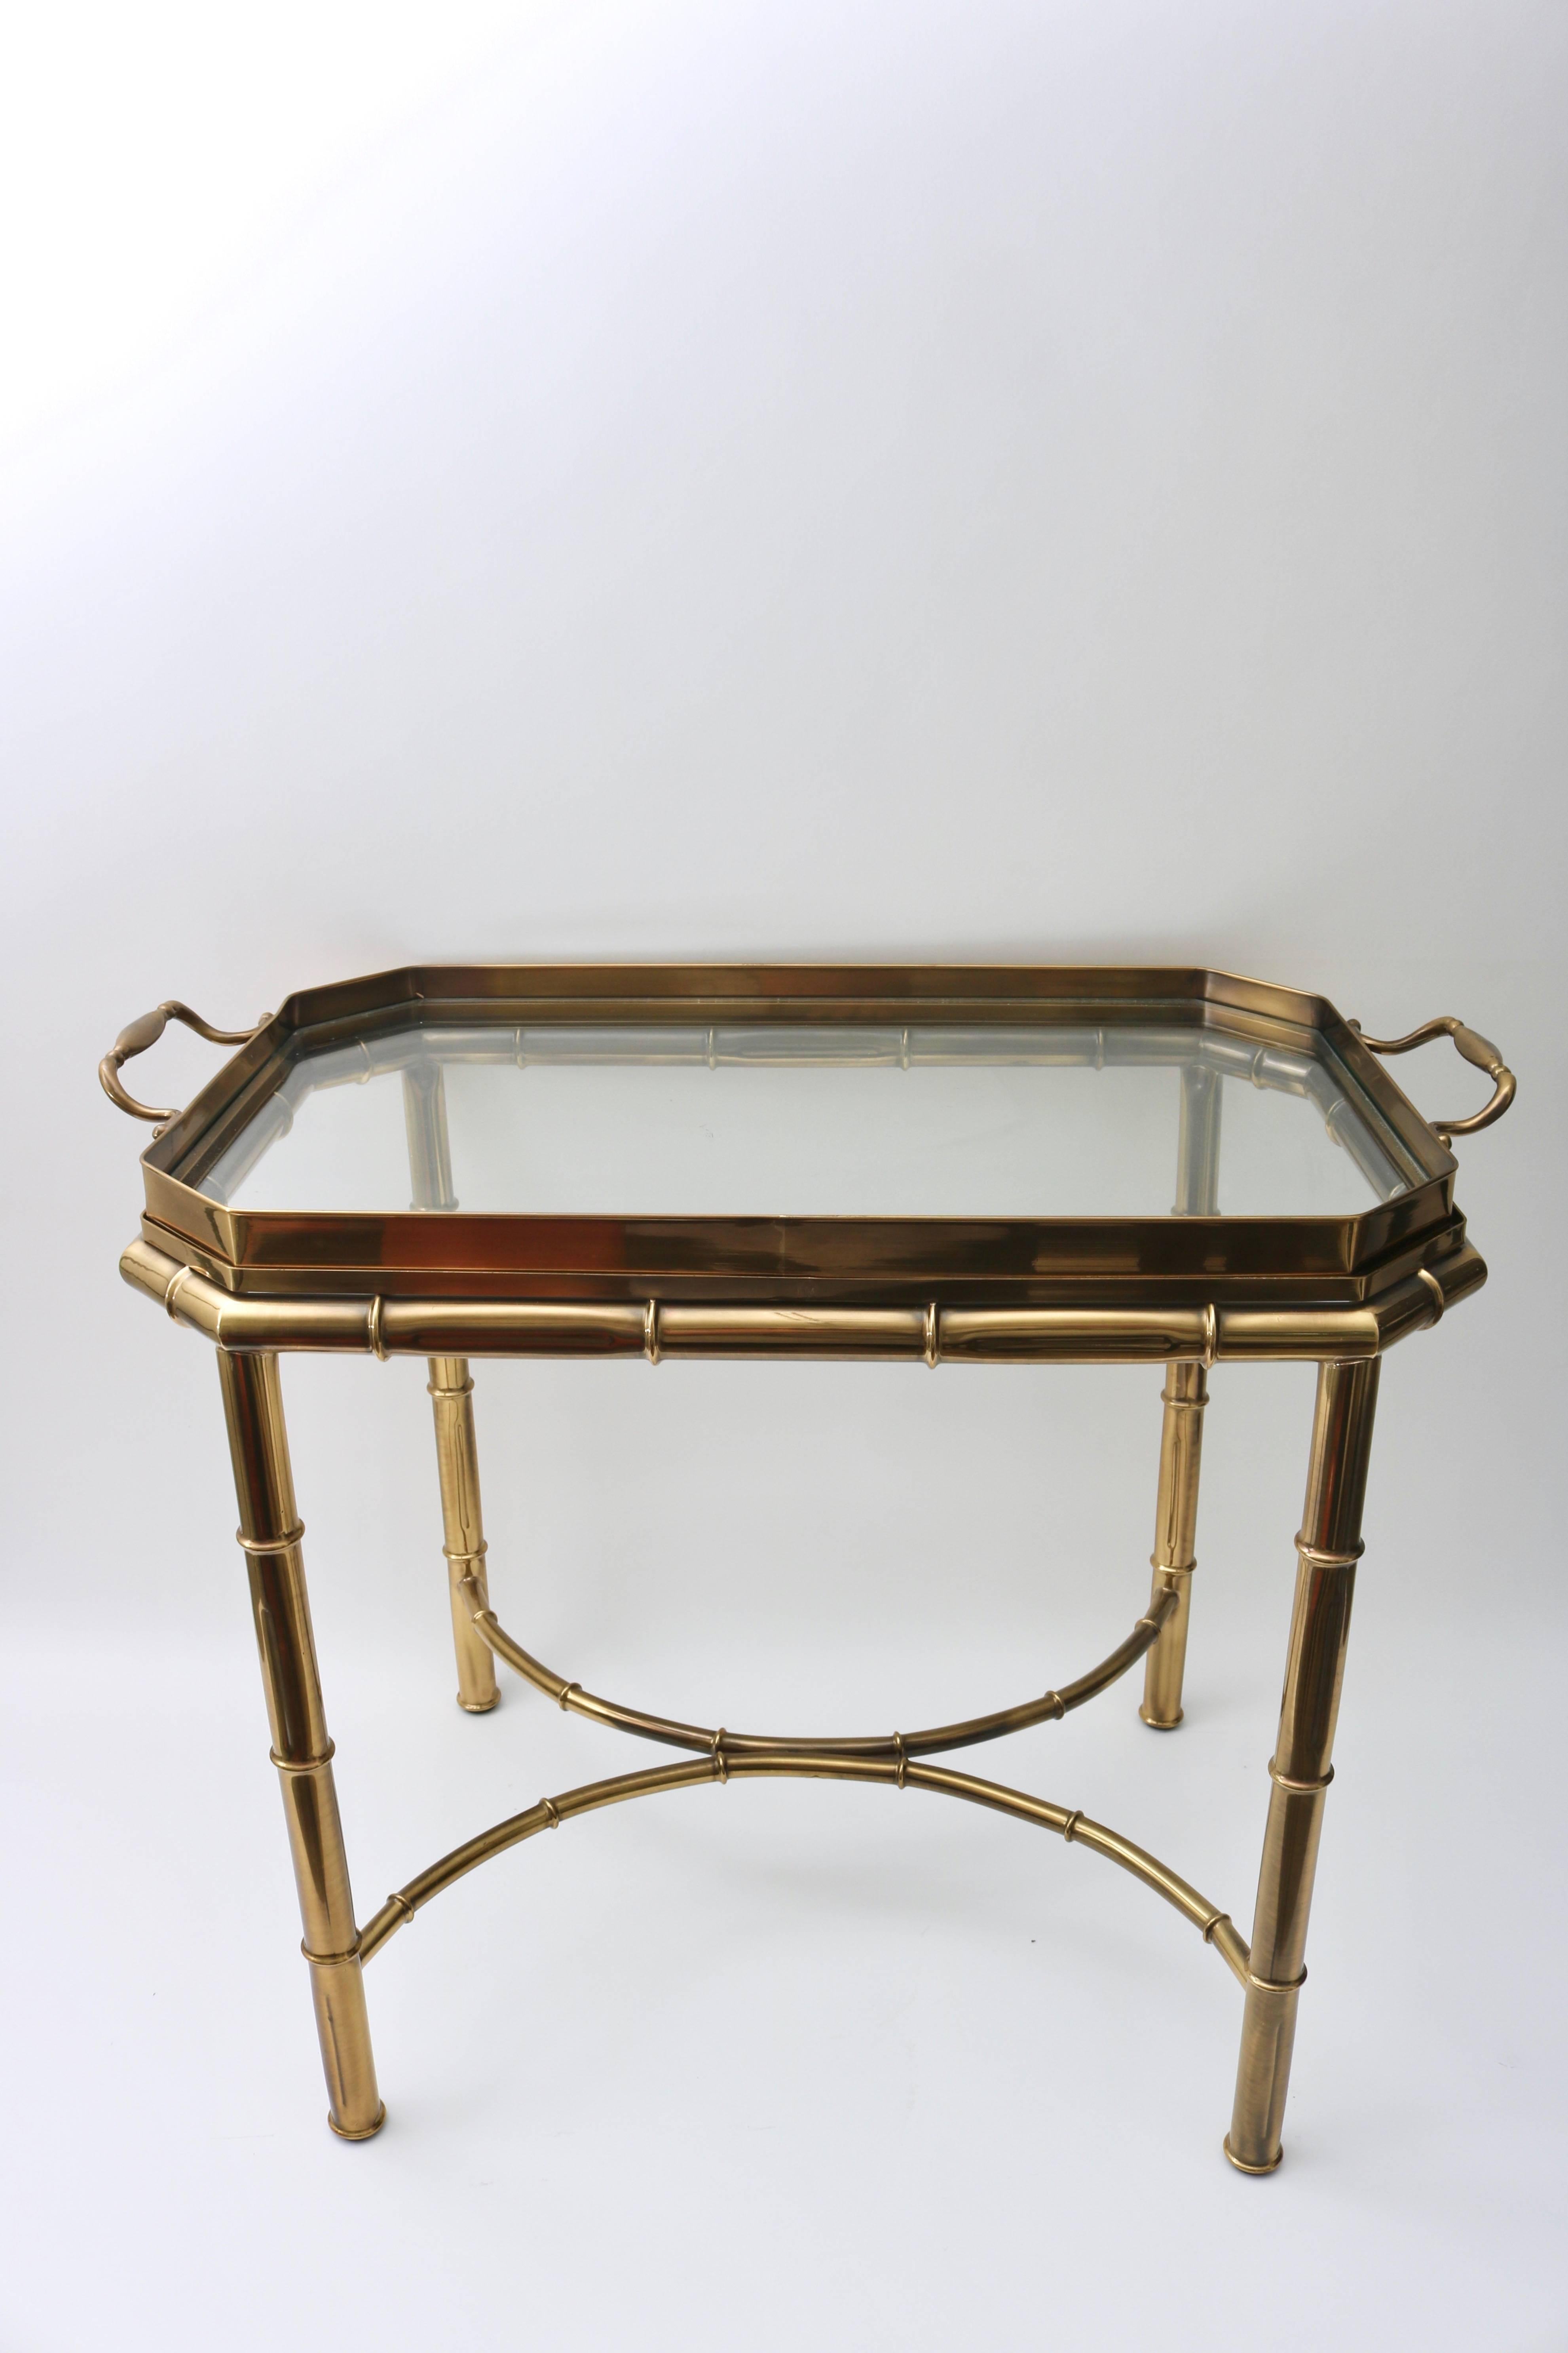 This stylish Master Craft furniture, Hollywood Regency faux bamboo table has a removable tray top that make serving an ease. The antique brass finish is subtle and Classic and has been maintained beautifully.


